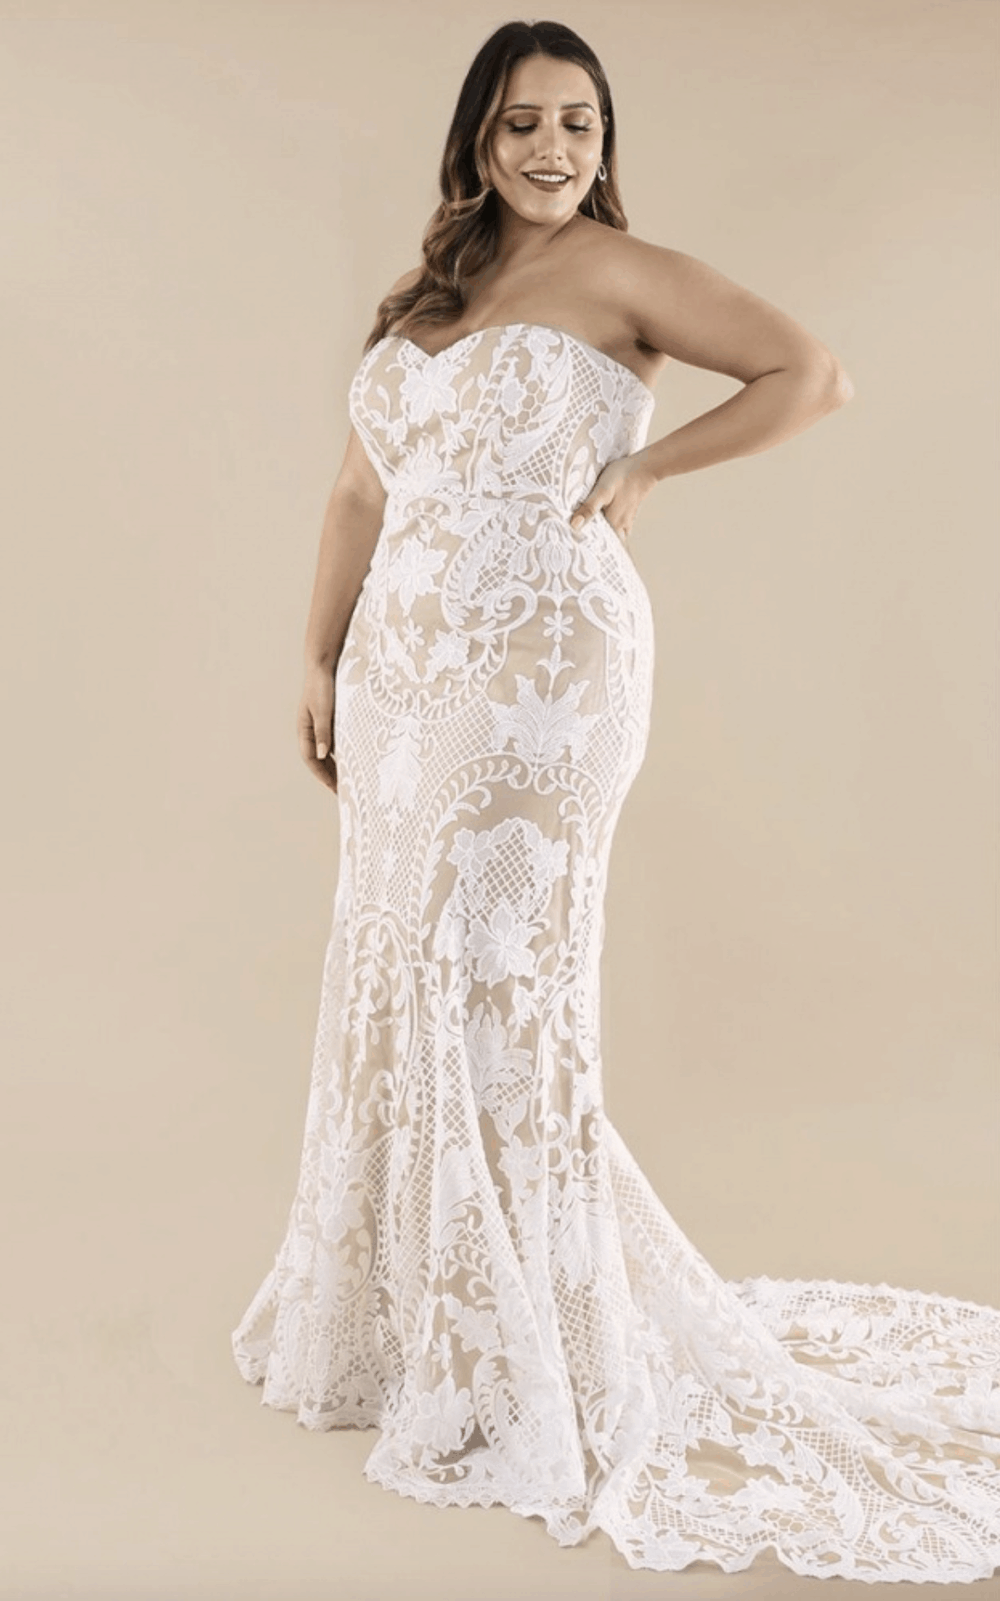 Plus Size Bridal Gowns and Wedding Dresses Perfect for Curvy Brides Embroidered Lace Overlay Long Train 2